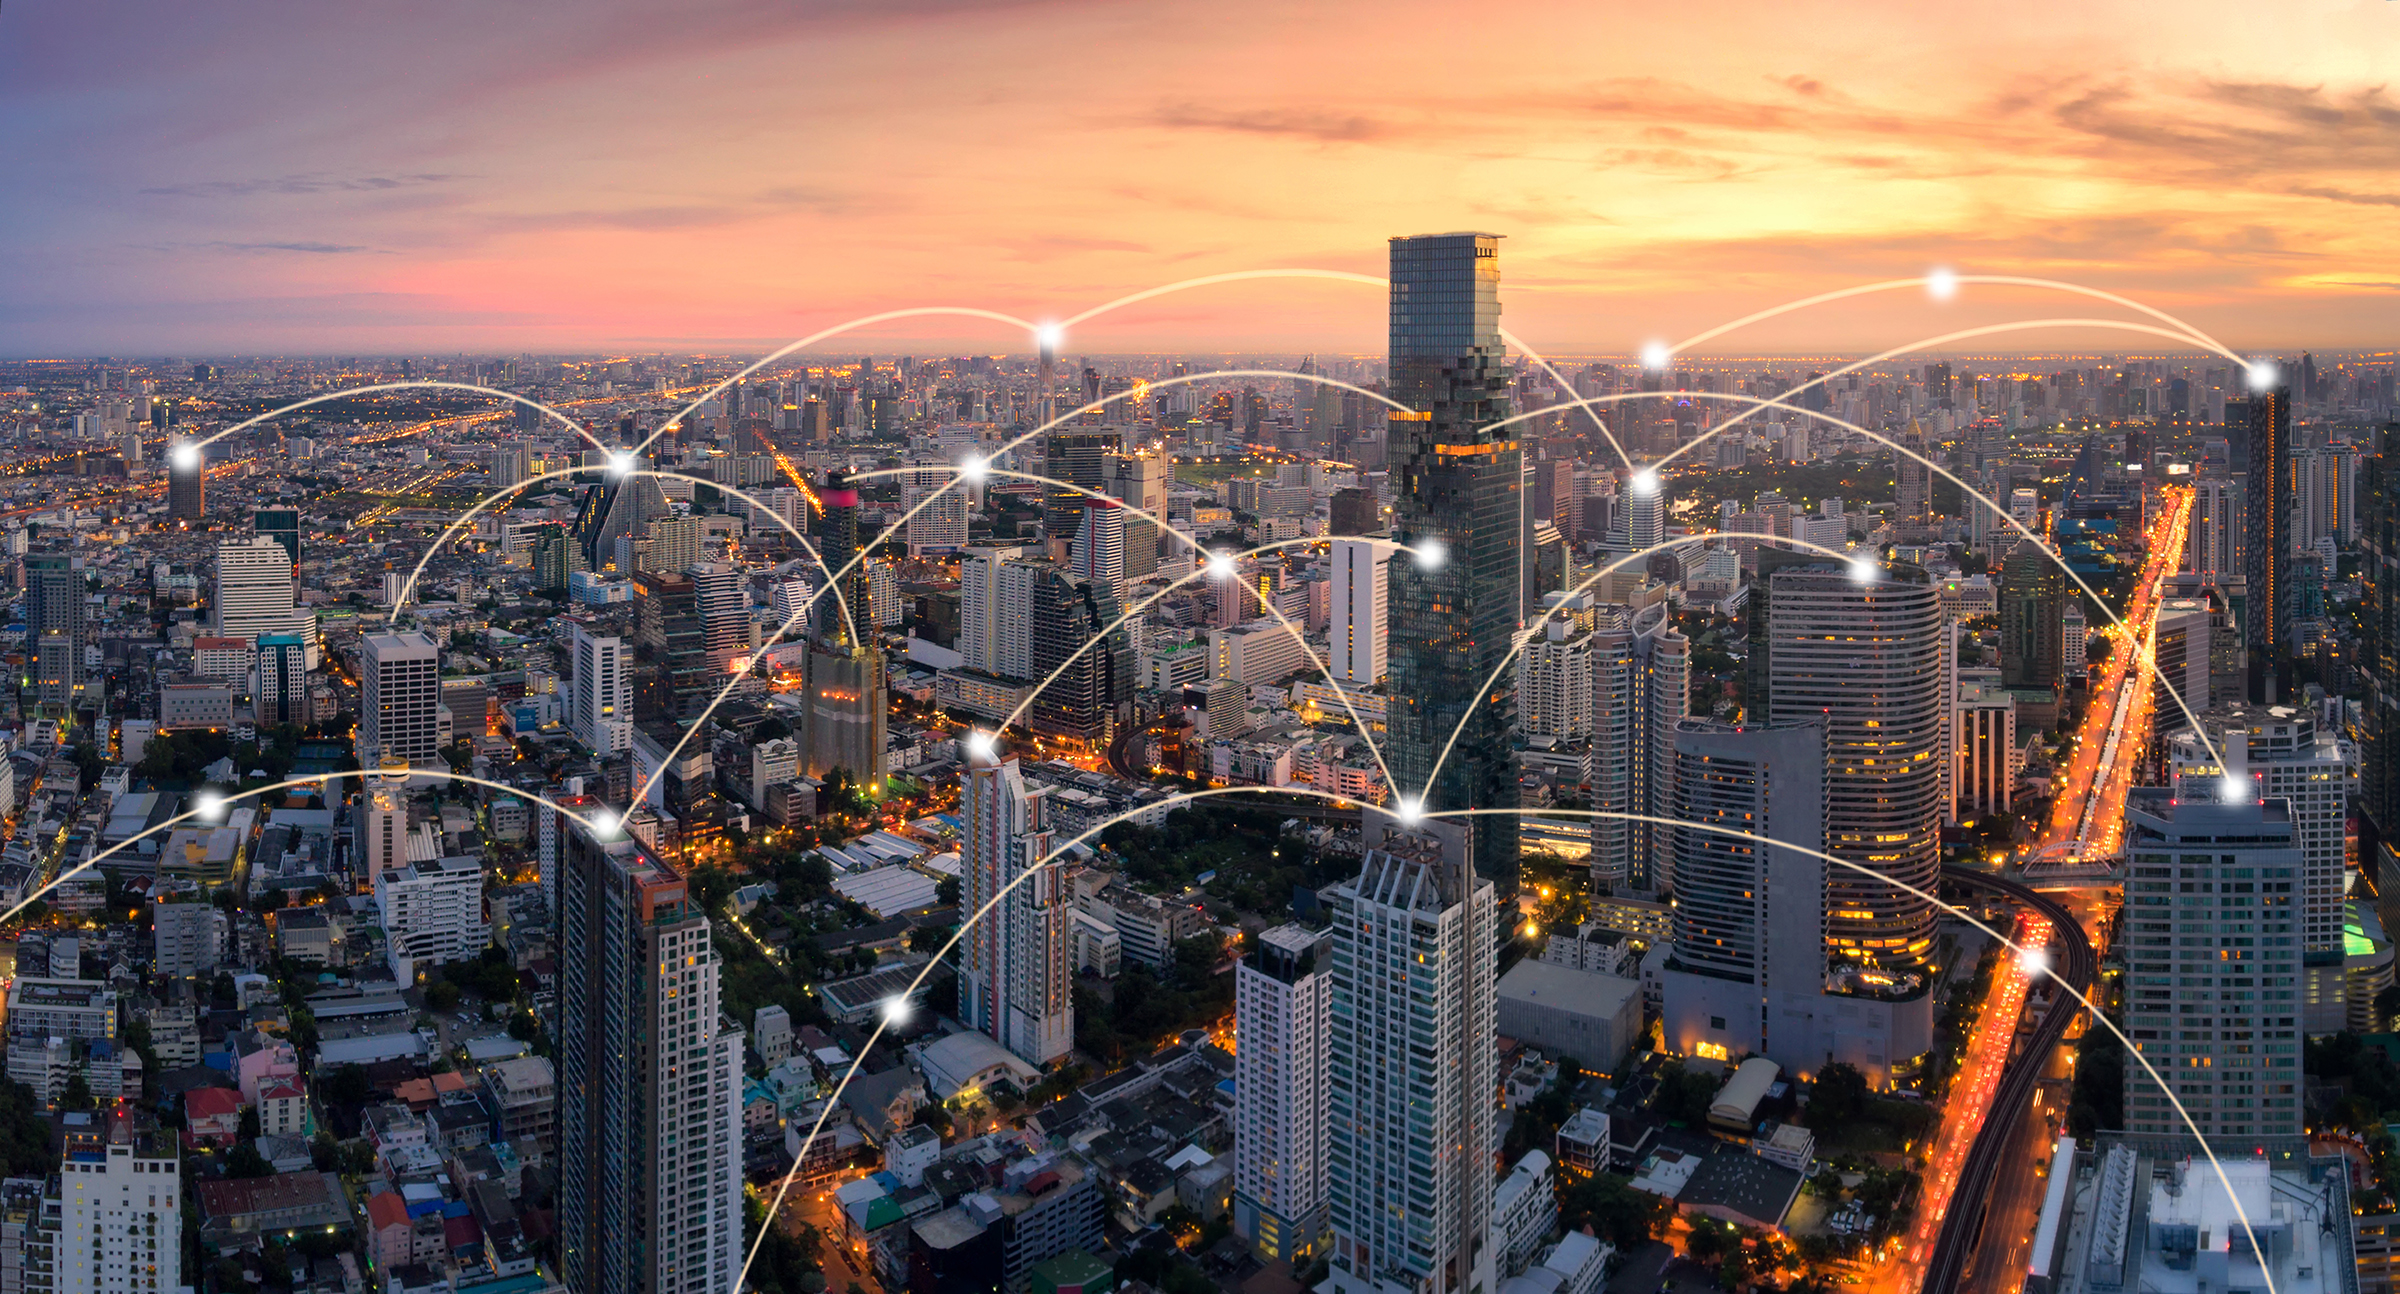 Making the IoT Building a Reality w/ Connected Buildings